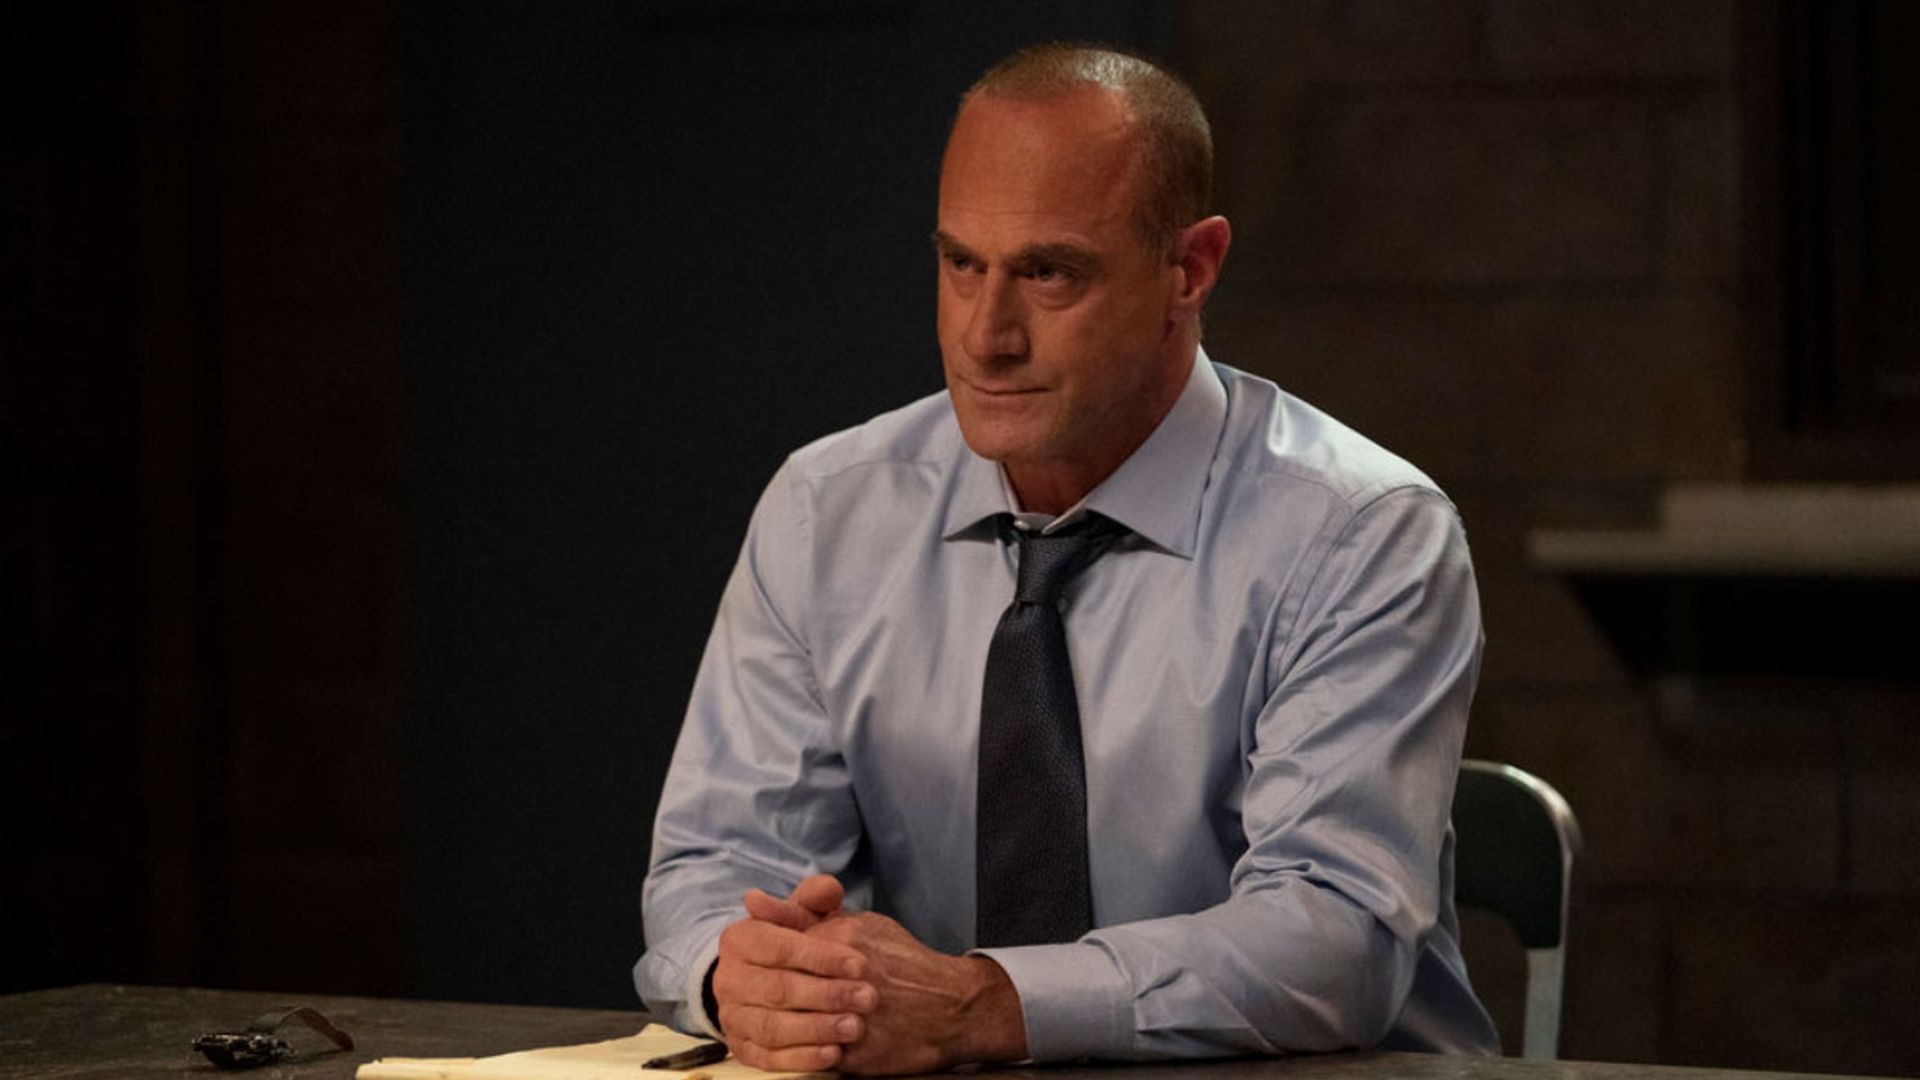 law and order stabler